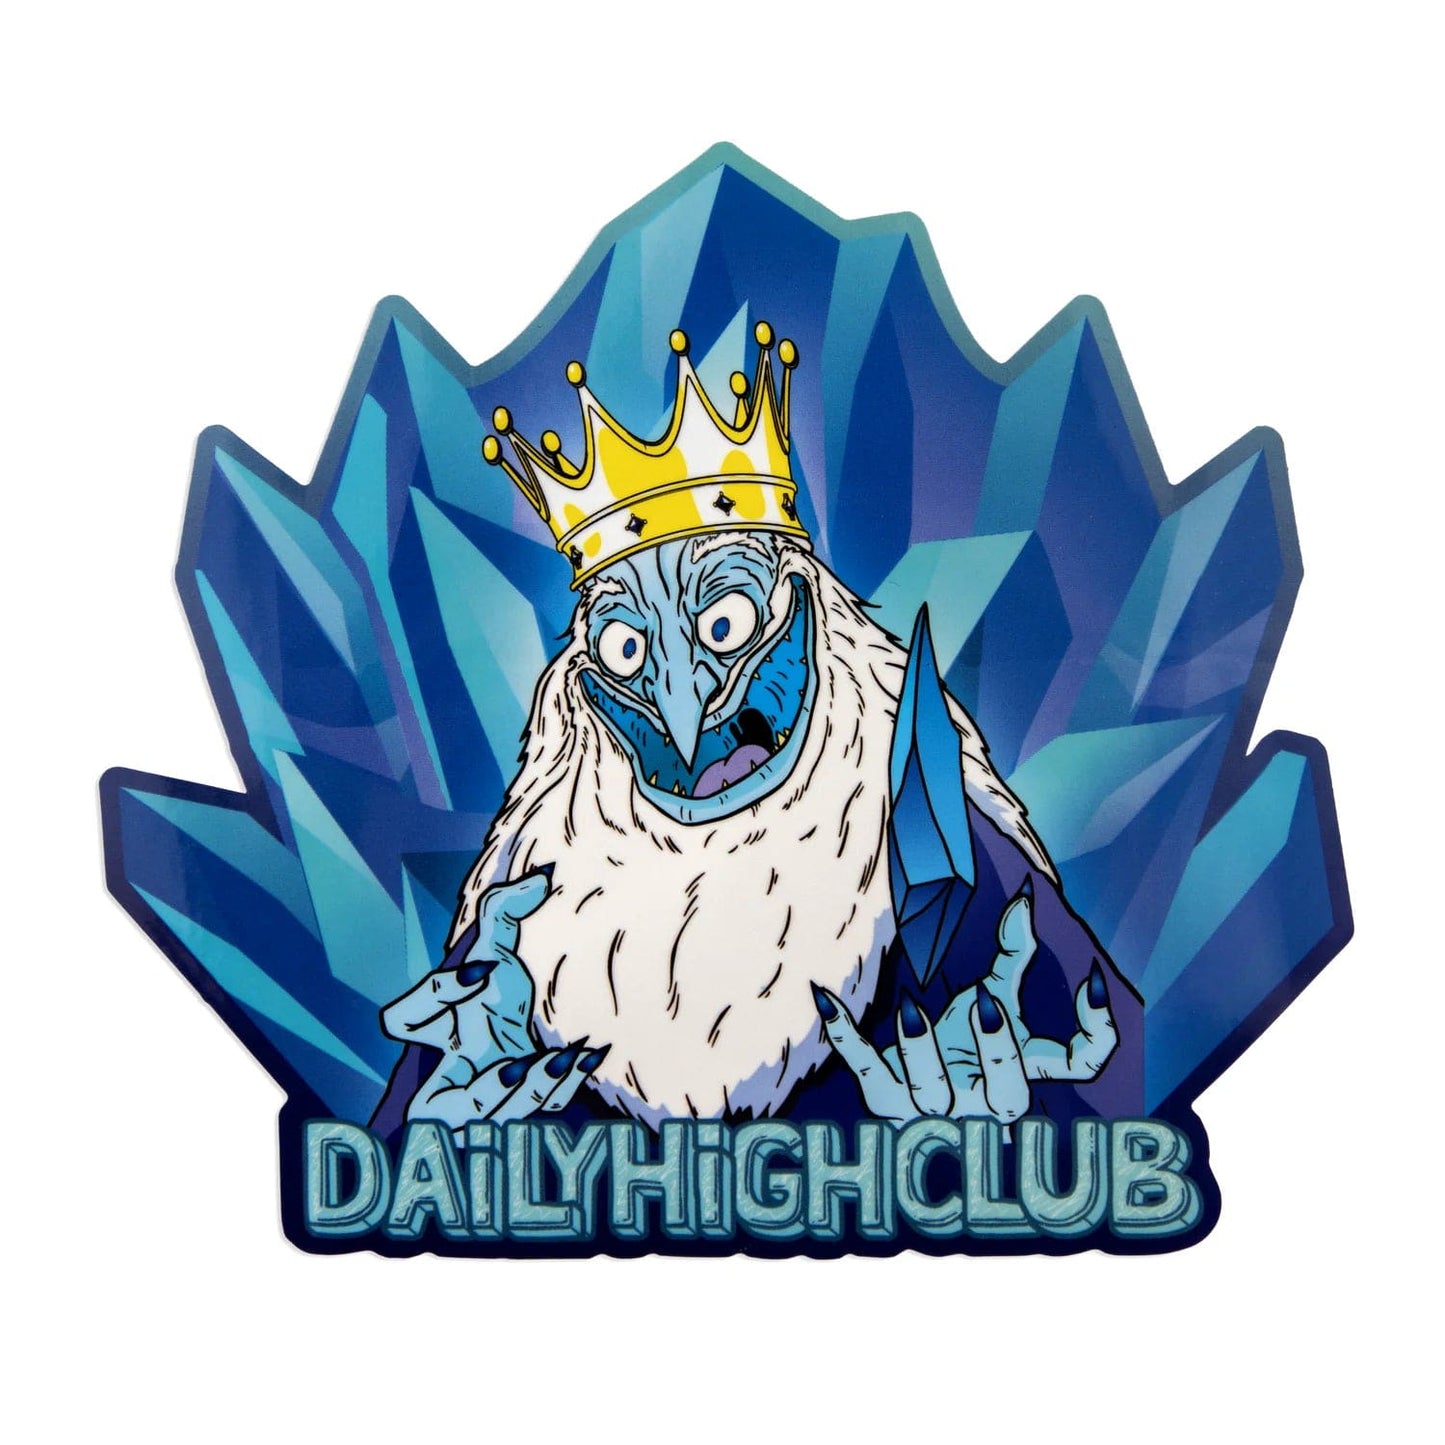 x2 Daily High Club themed stickers